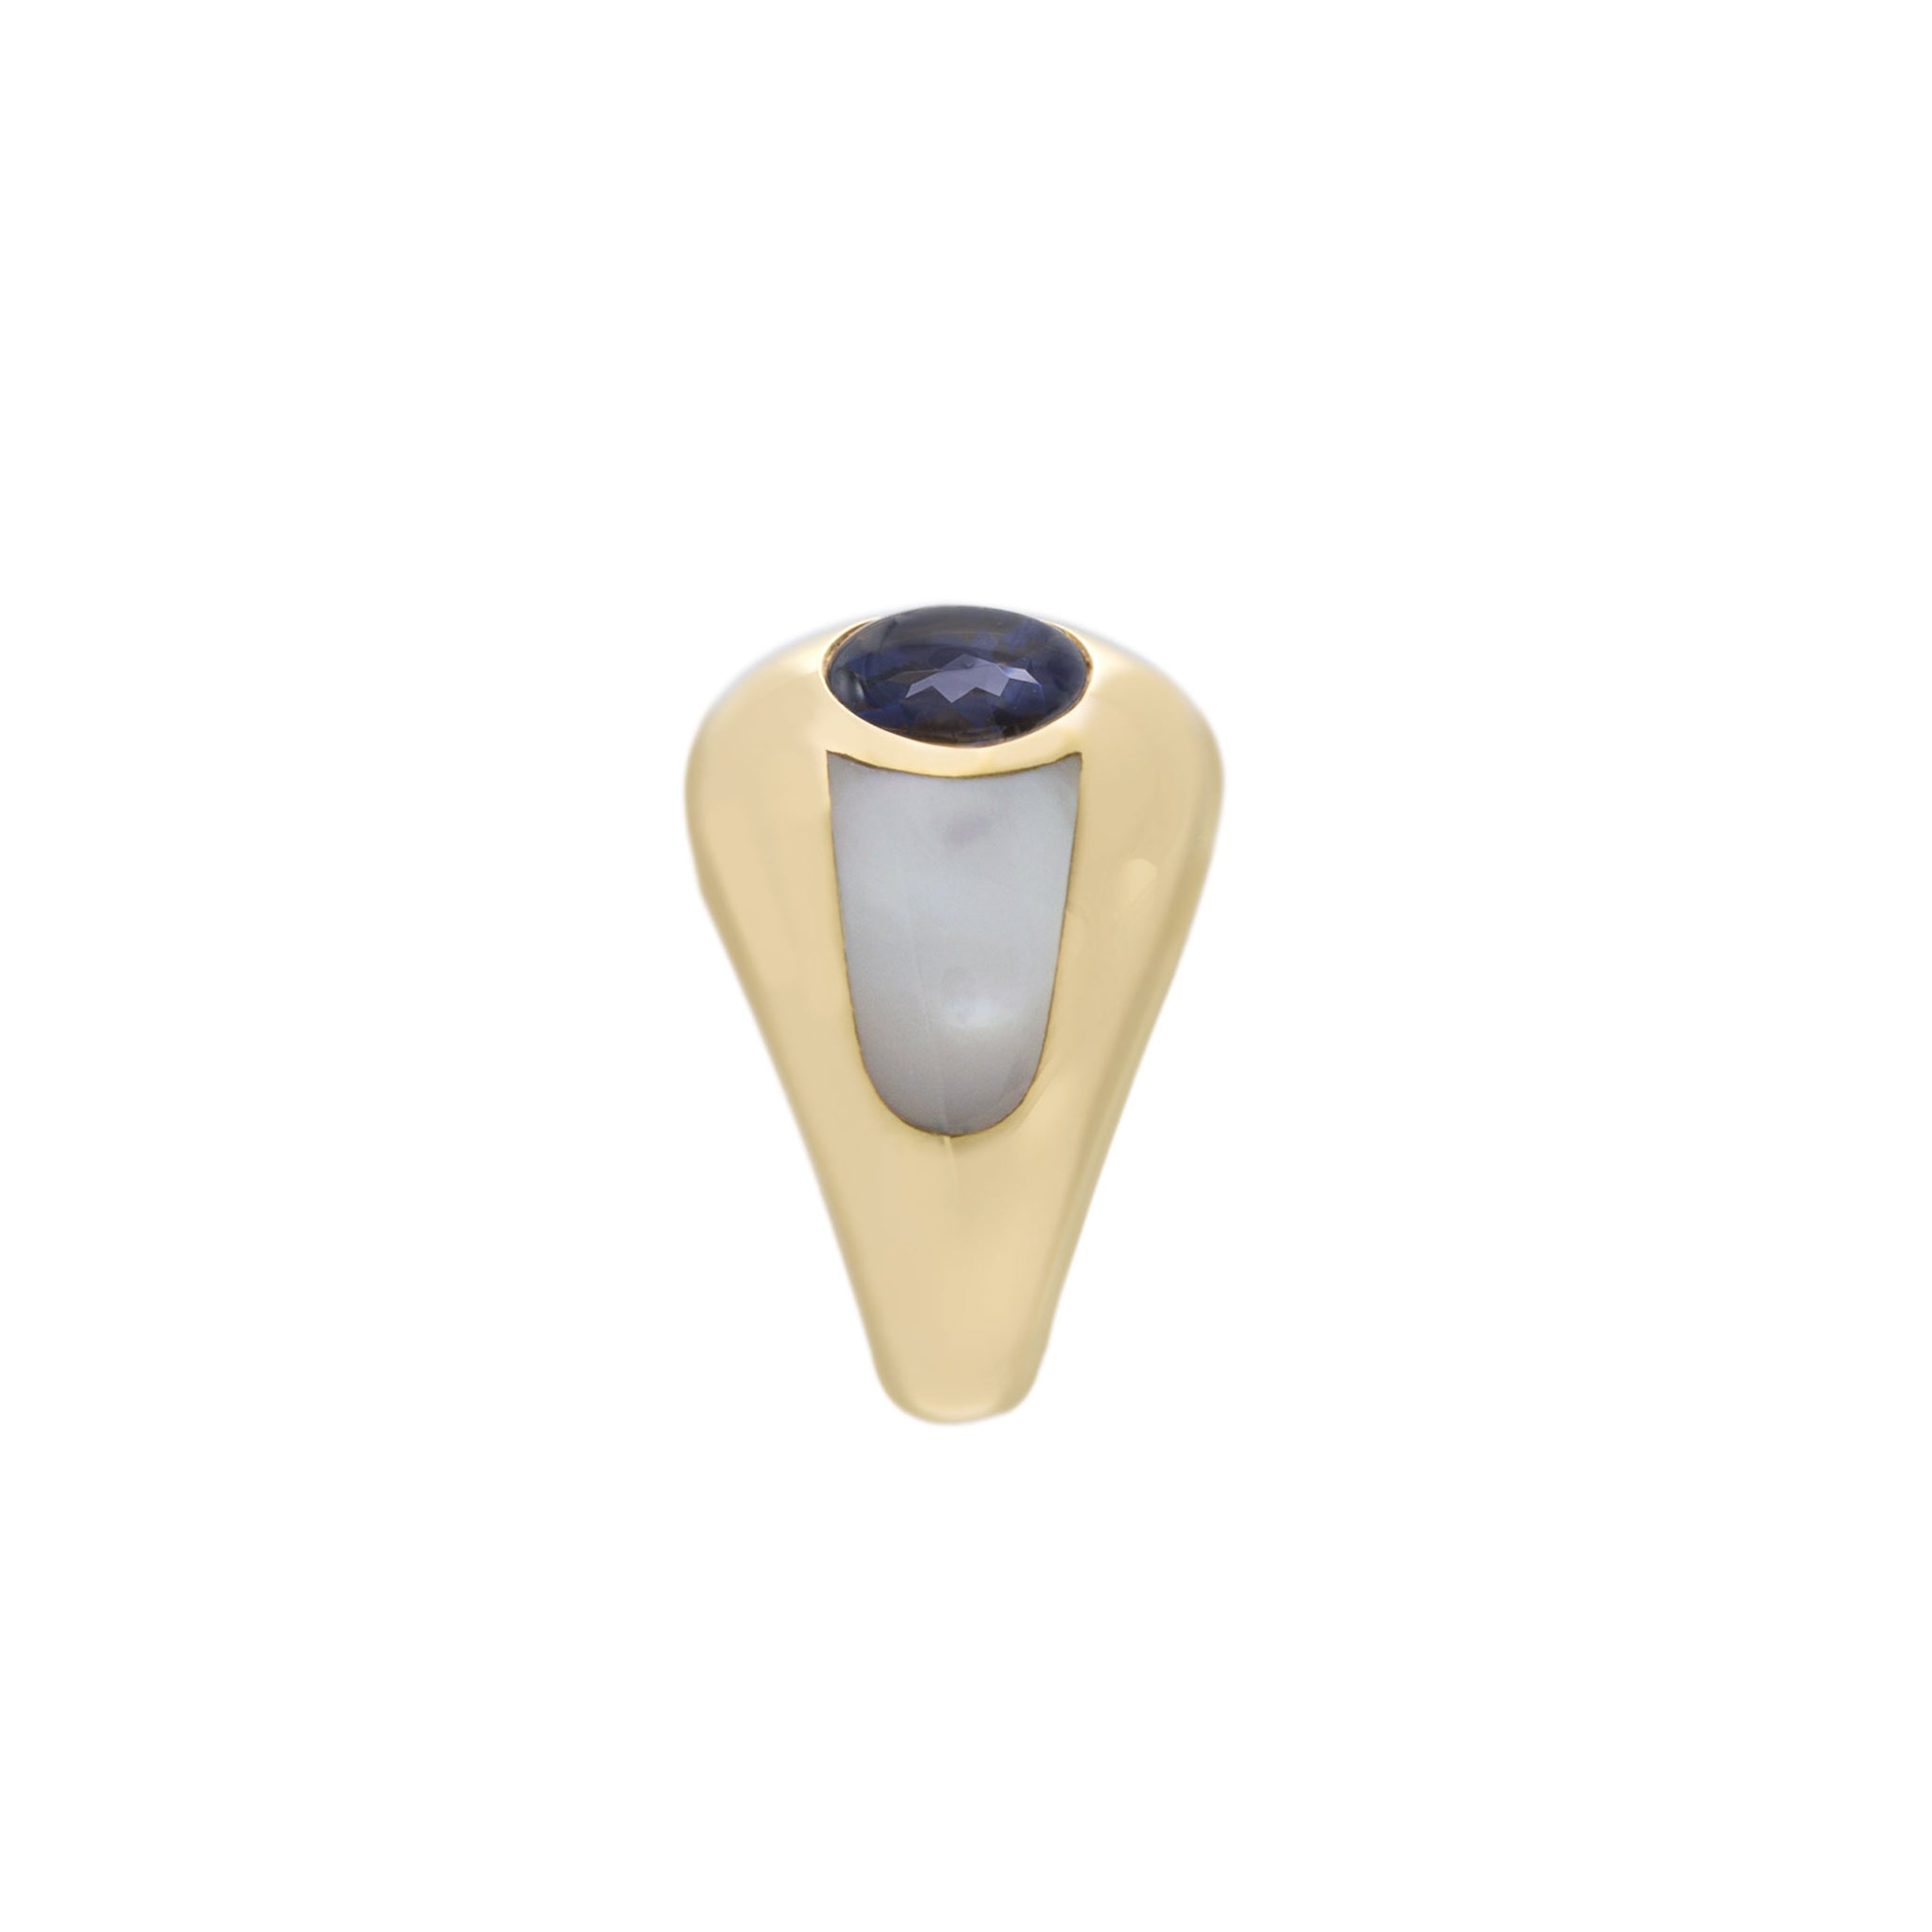 Vintage Mauboussin 18KT Yellow Gold Blue Iolite Dome Ring